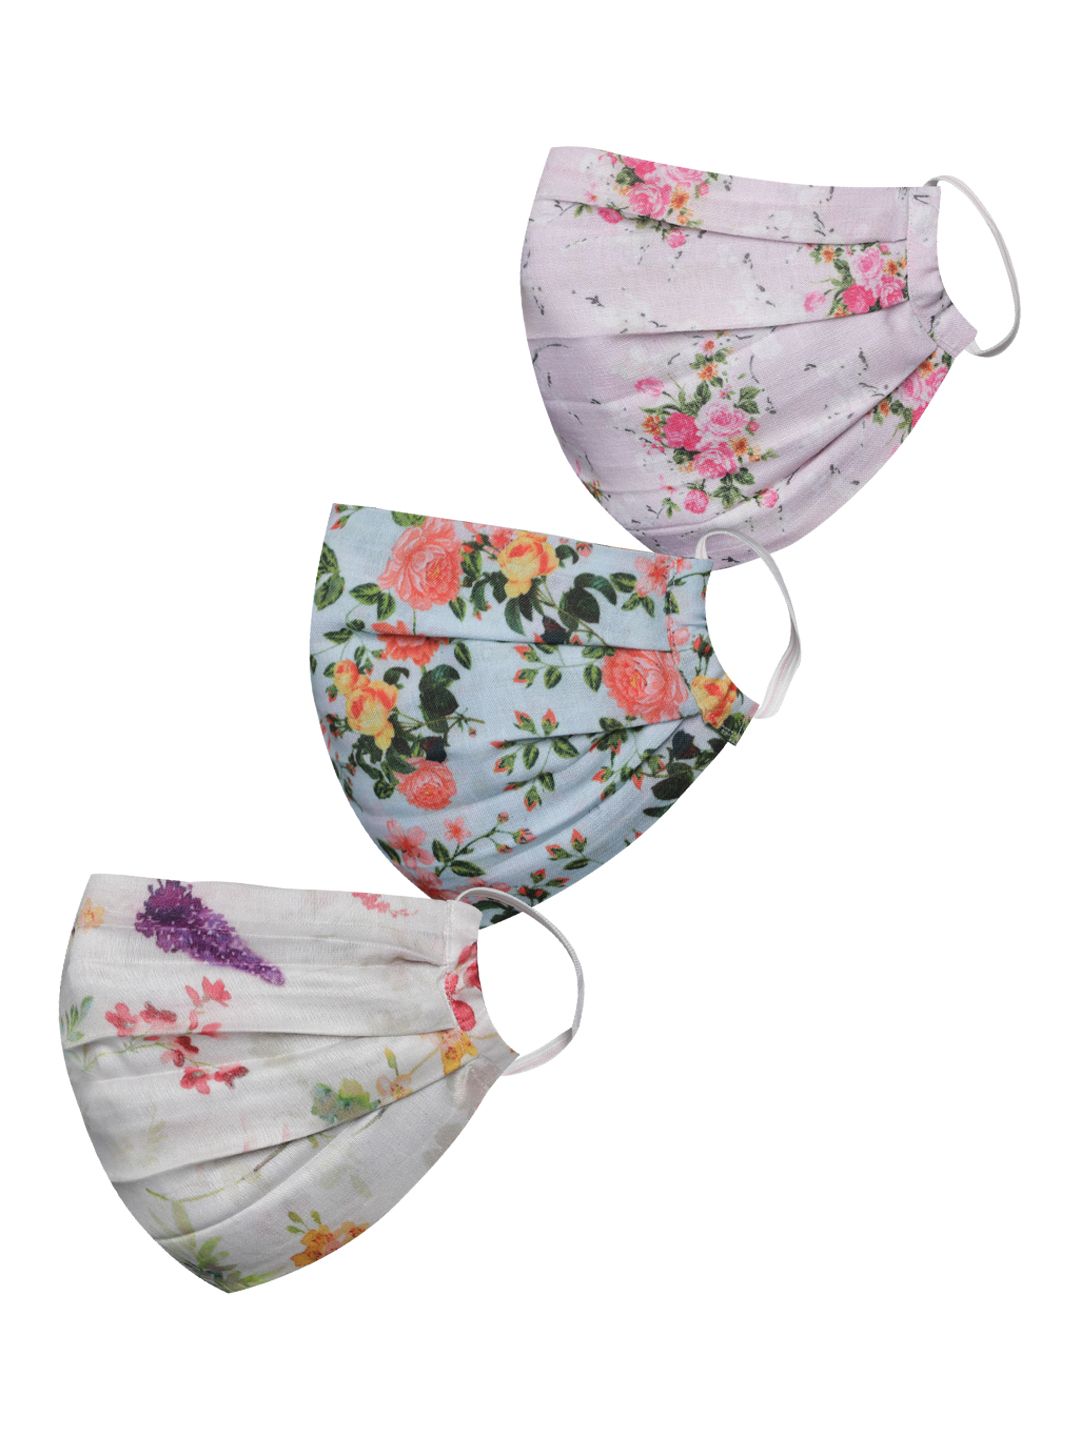 VASTRAMAY Unisex Set of 3 Reusable 2-Ply Floral Print Protective Outdoor Cloth Face Masks Price in India